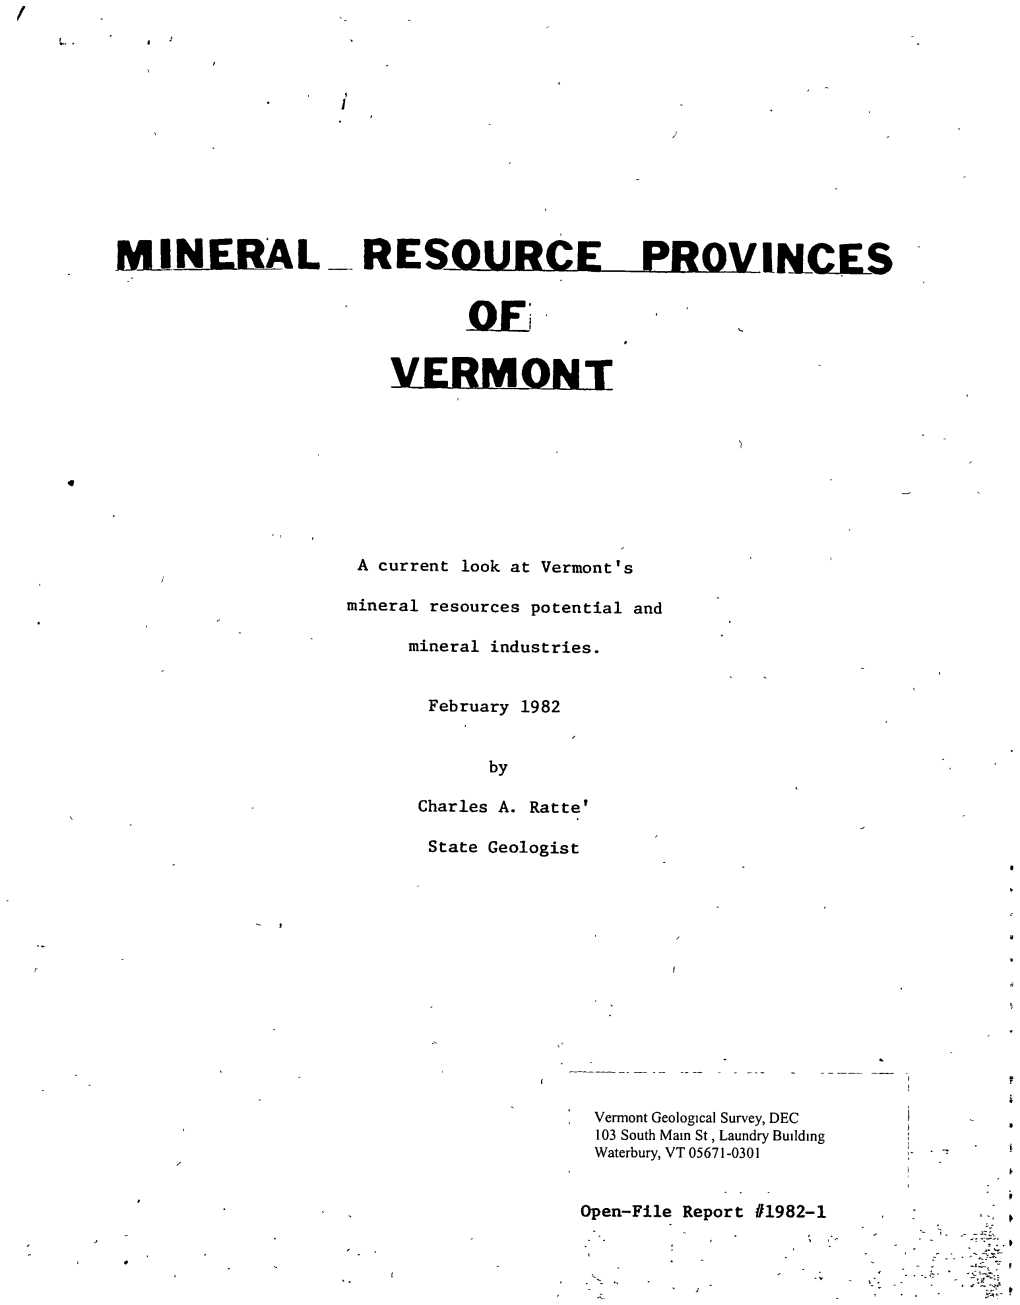 Mineral Resource Provinces of Vermont: a Current Look at Vermont's Mineral Resources Potential and Mineral Industries: Vt